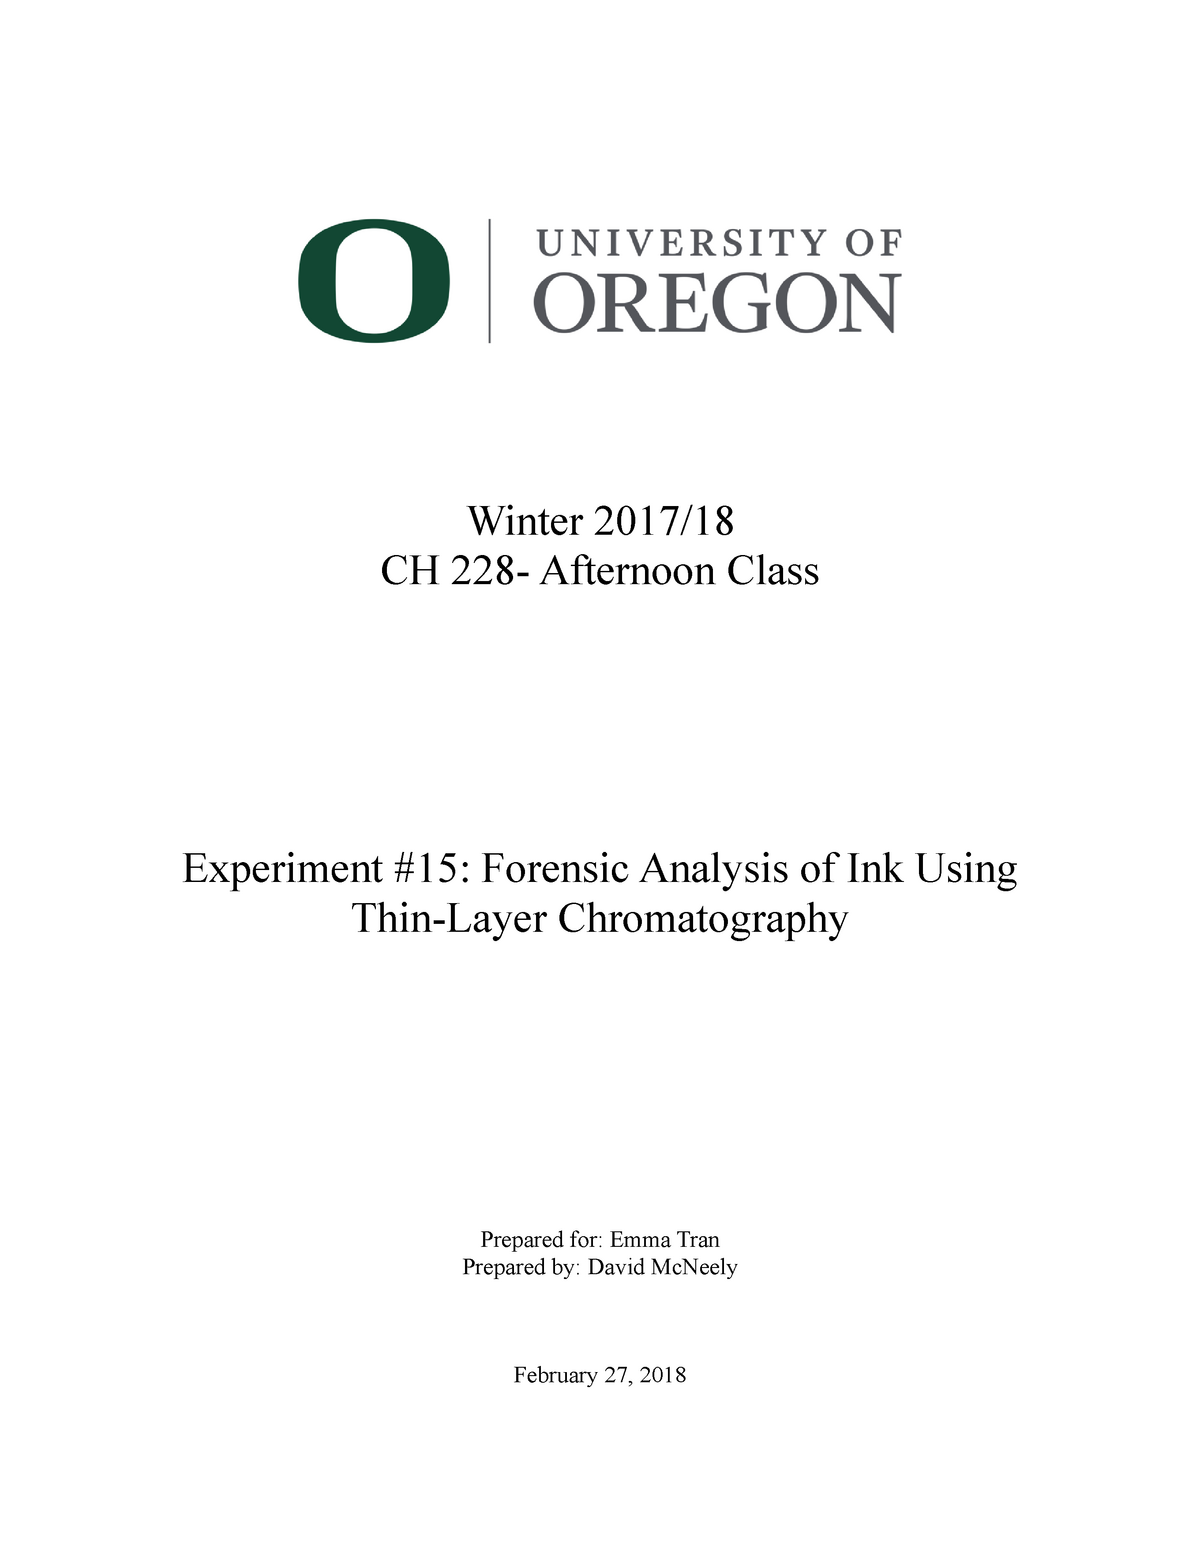 Lab Report 14 (Exp 15) - Winter 2017/ CH 228- Afternoon Class ...